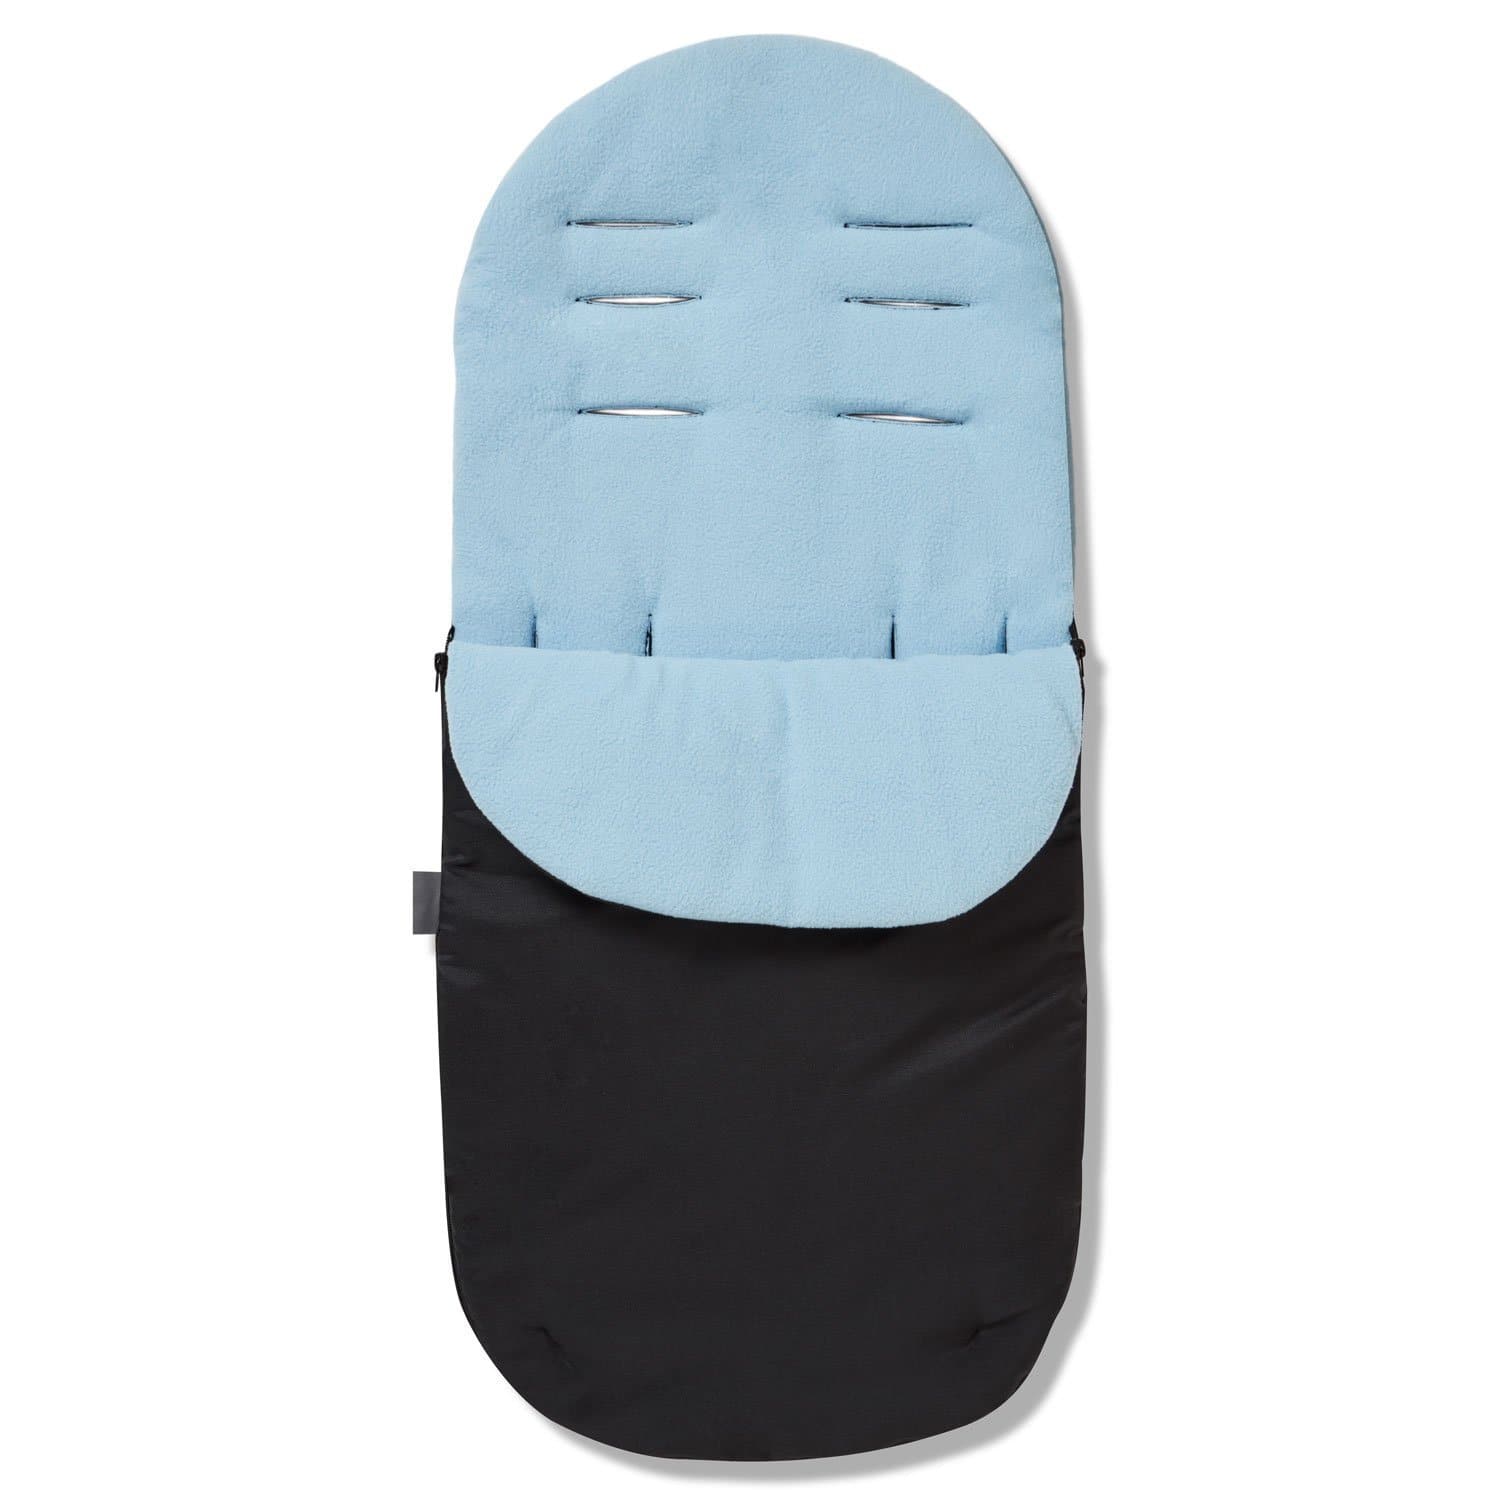 Footmuff / Cosy Toes Compatible with Little Shield - Light Blue / Fits All Models | For Your Little One